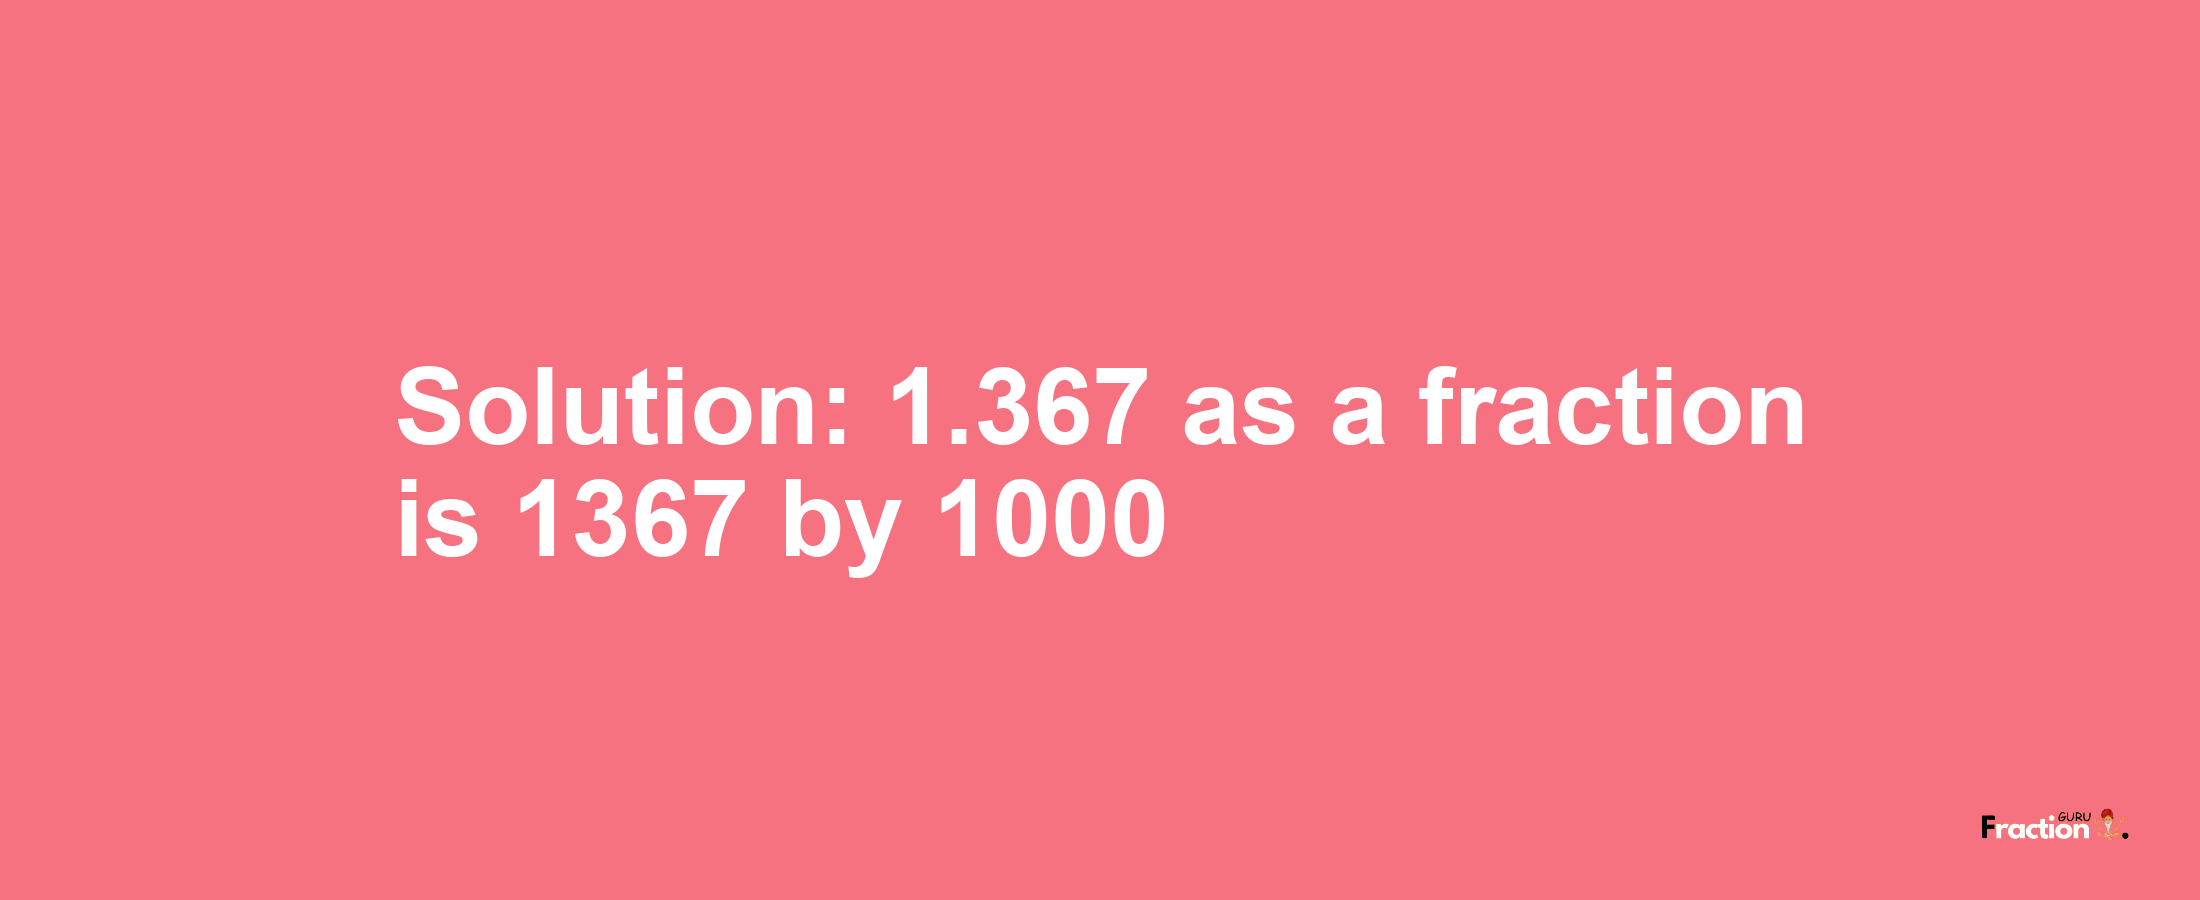 Solution:1.367 as a fraction is 1367/1000